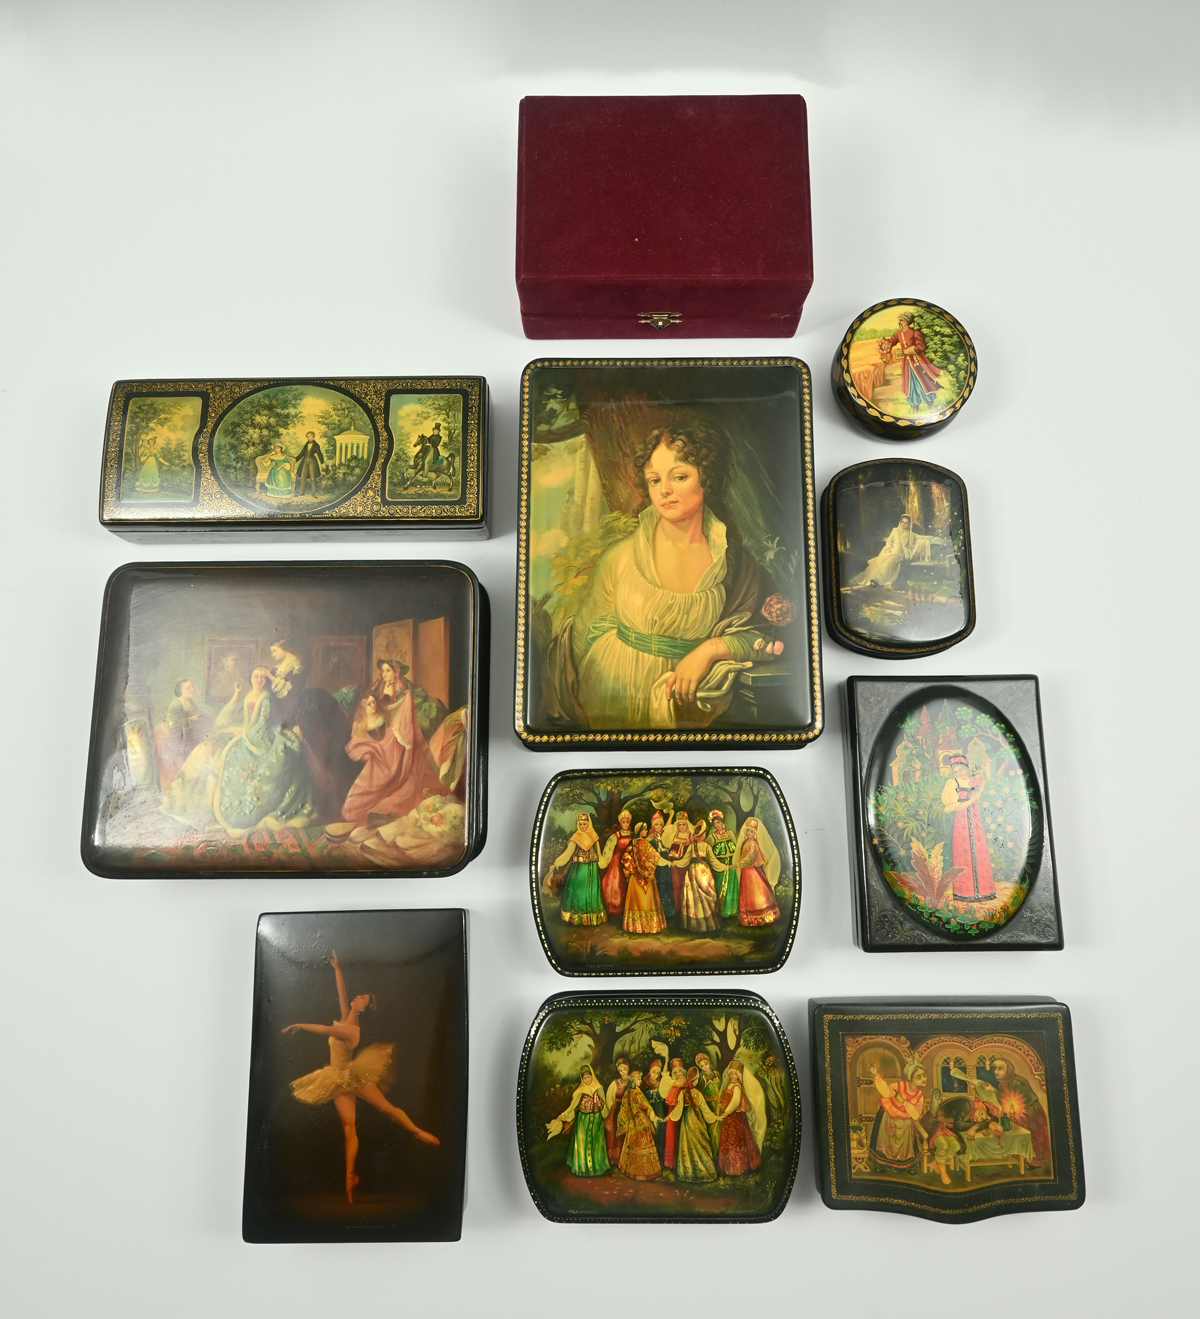 11PC. LACQUER BOX COLLECTION: Various